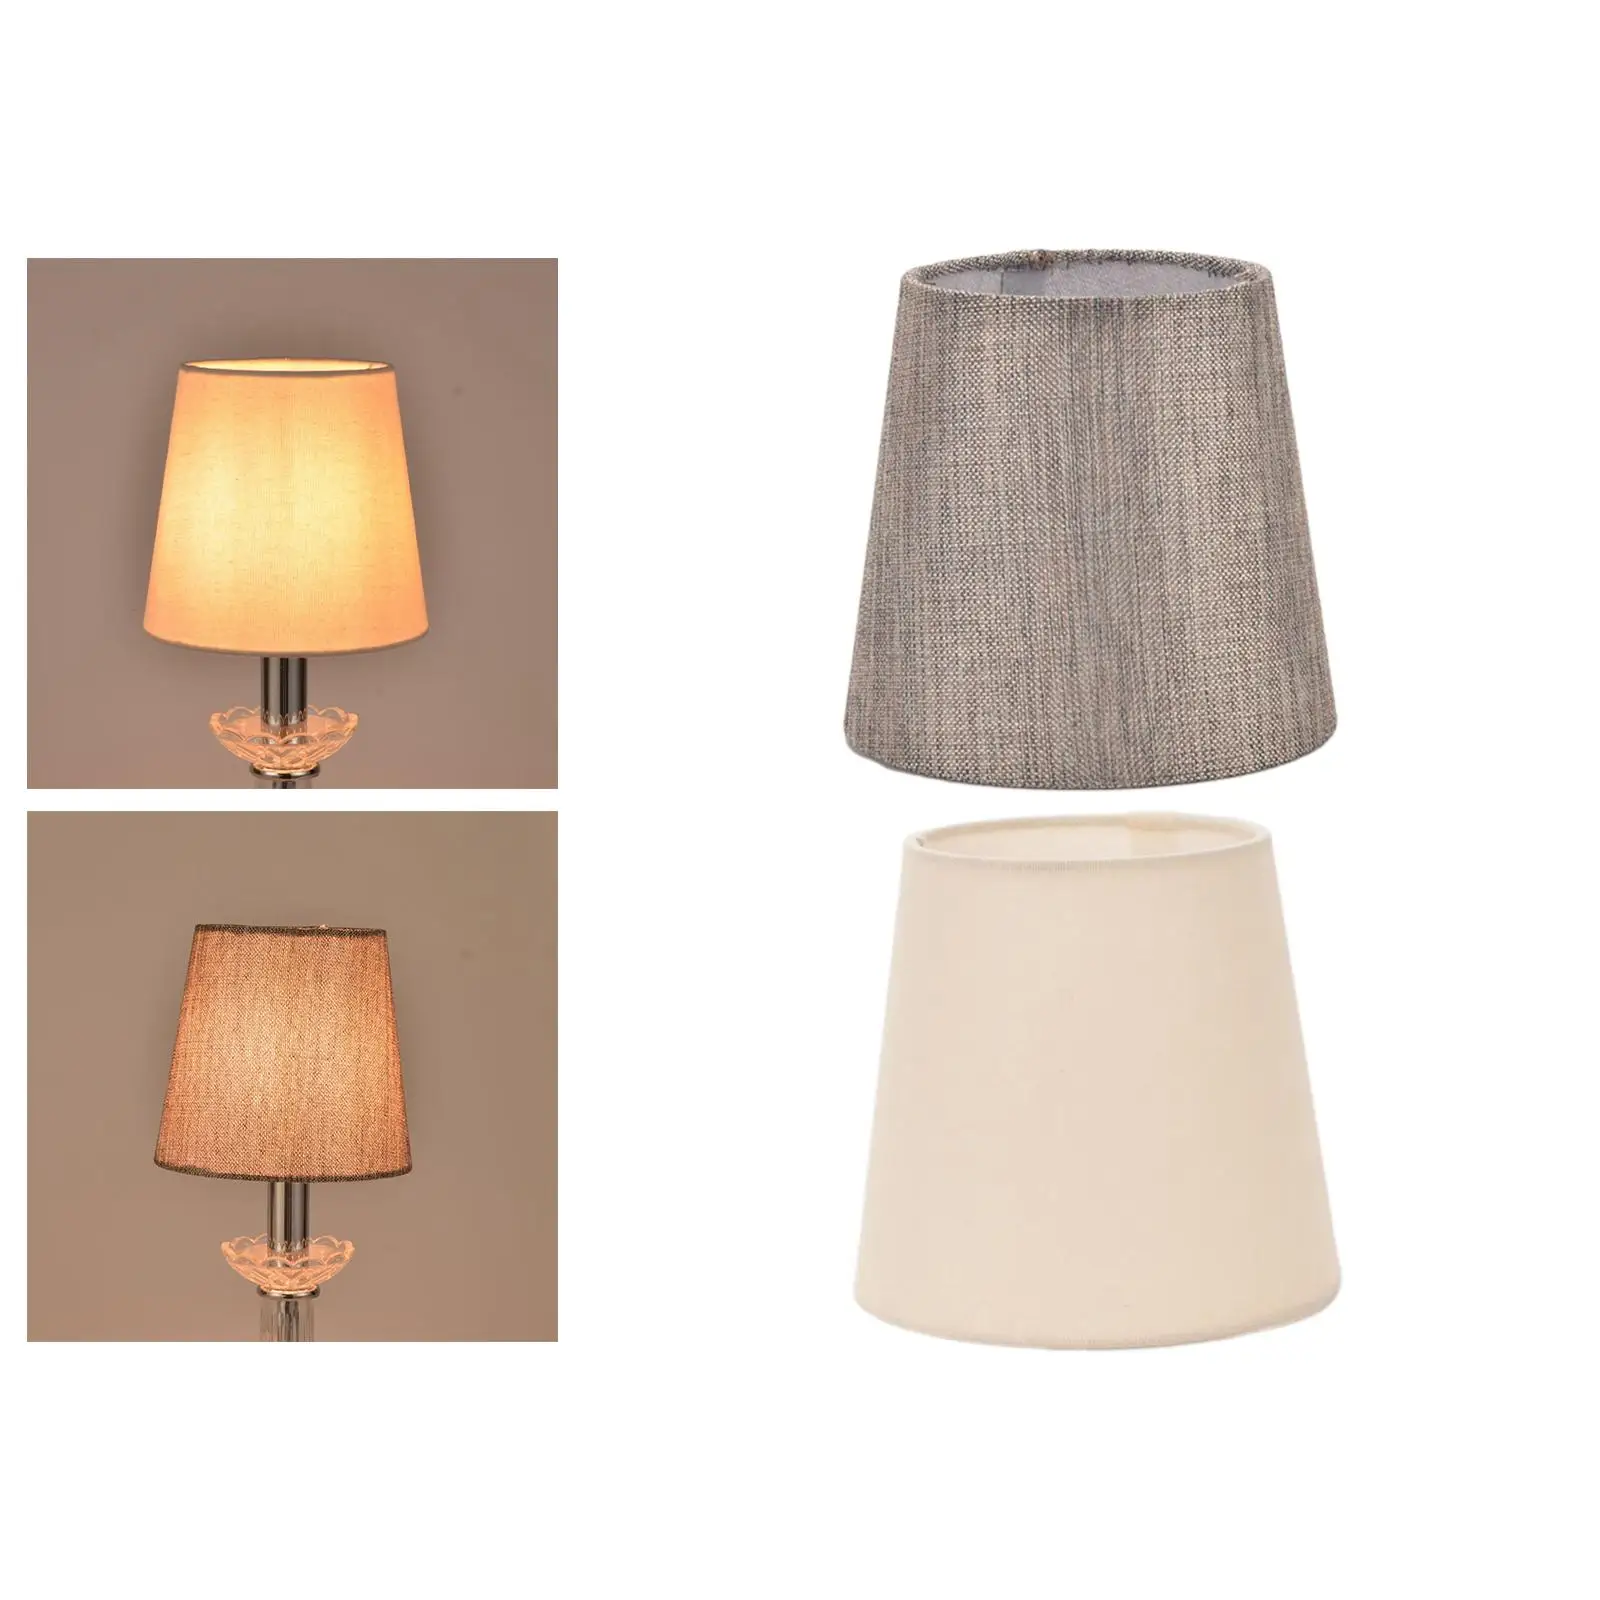 Drum Lamp Shade Table Lampshade for Kitchen Living Room